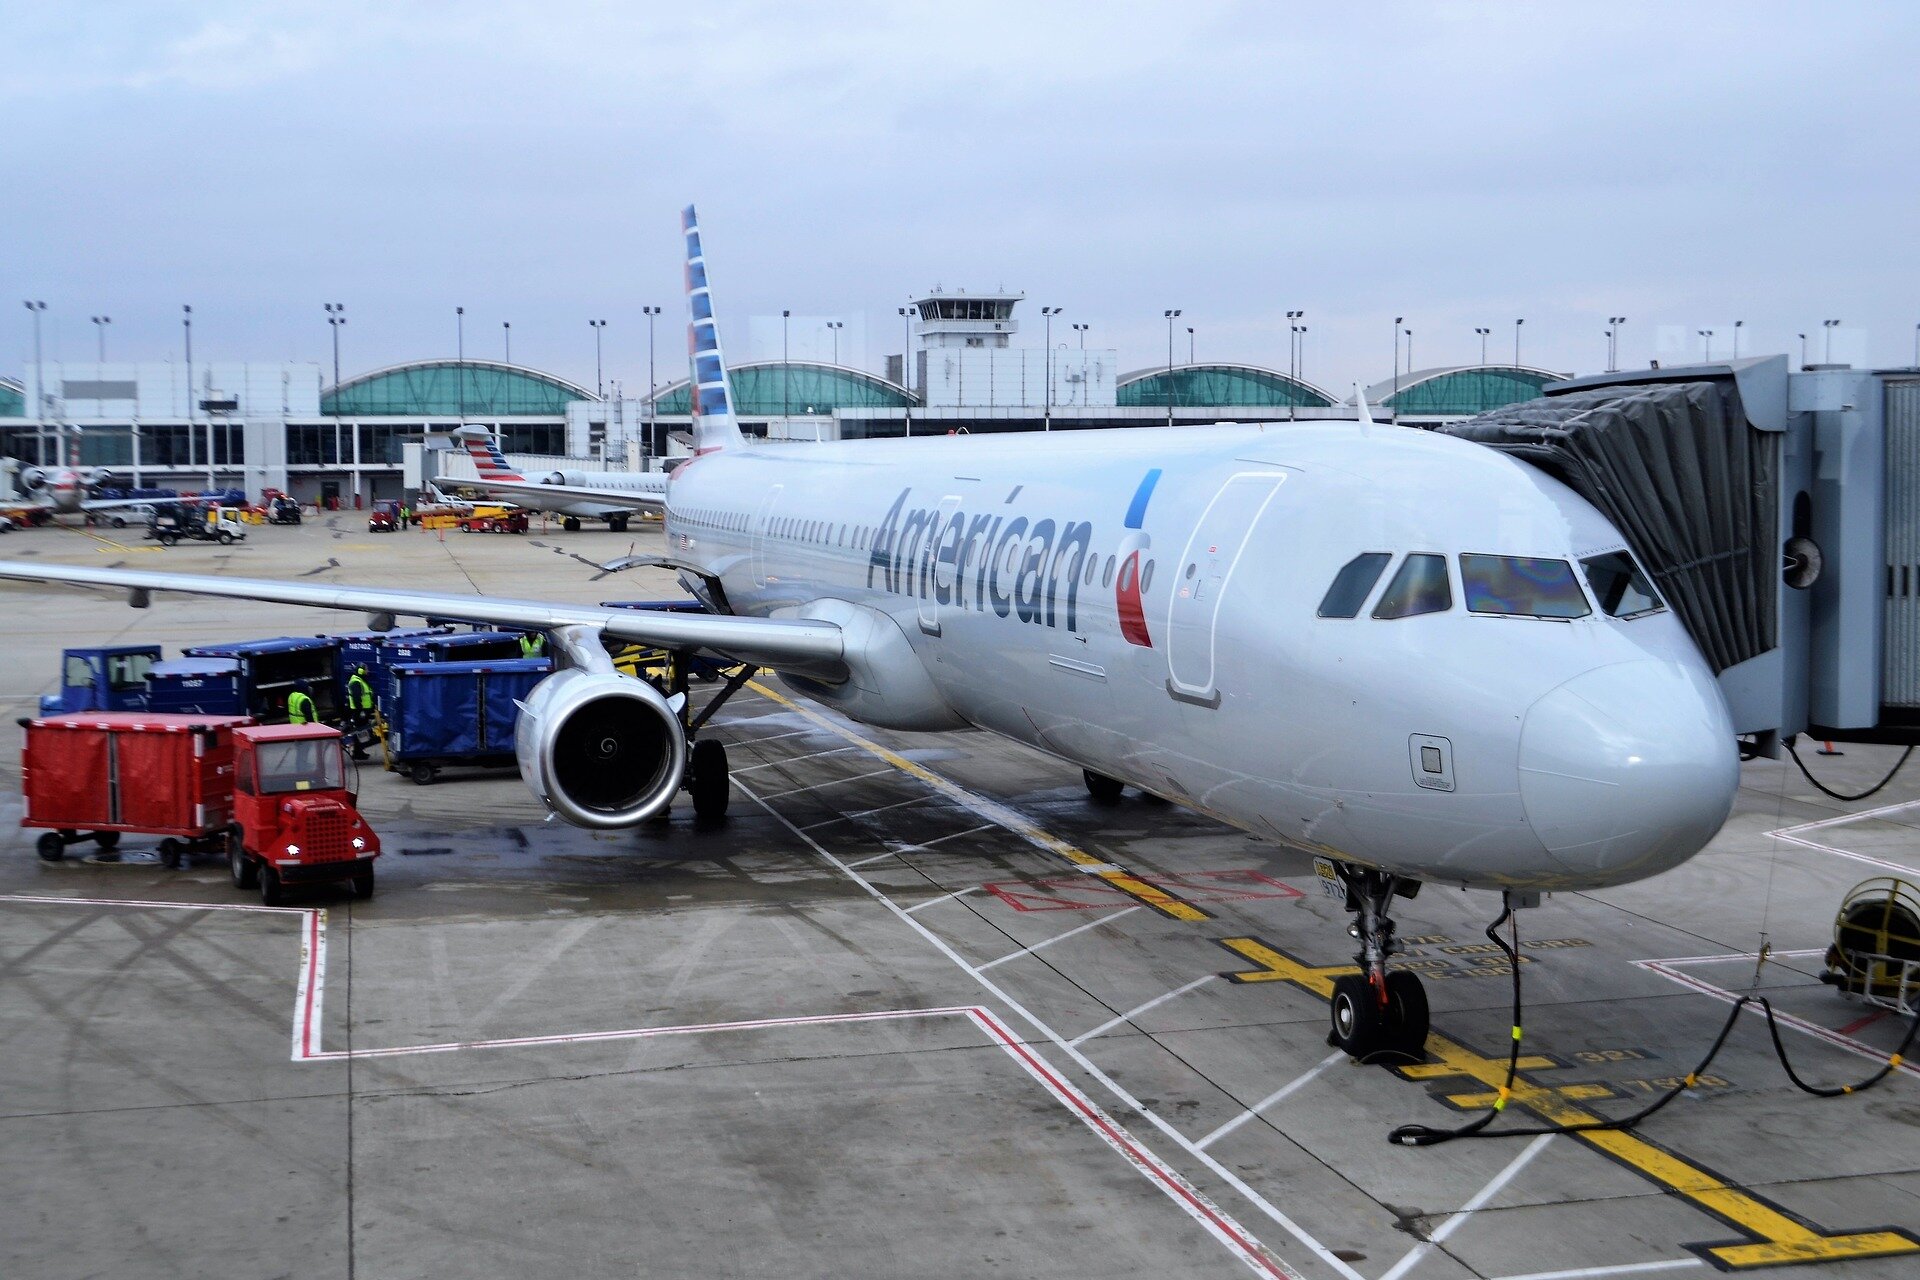 #American Airlines testing face-scanning at DFW Airport